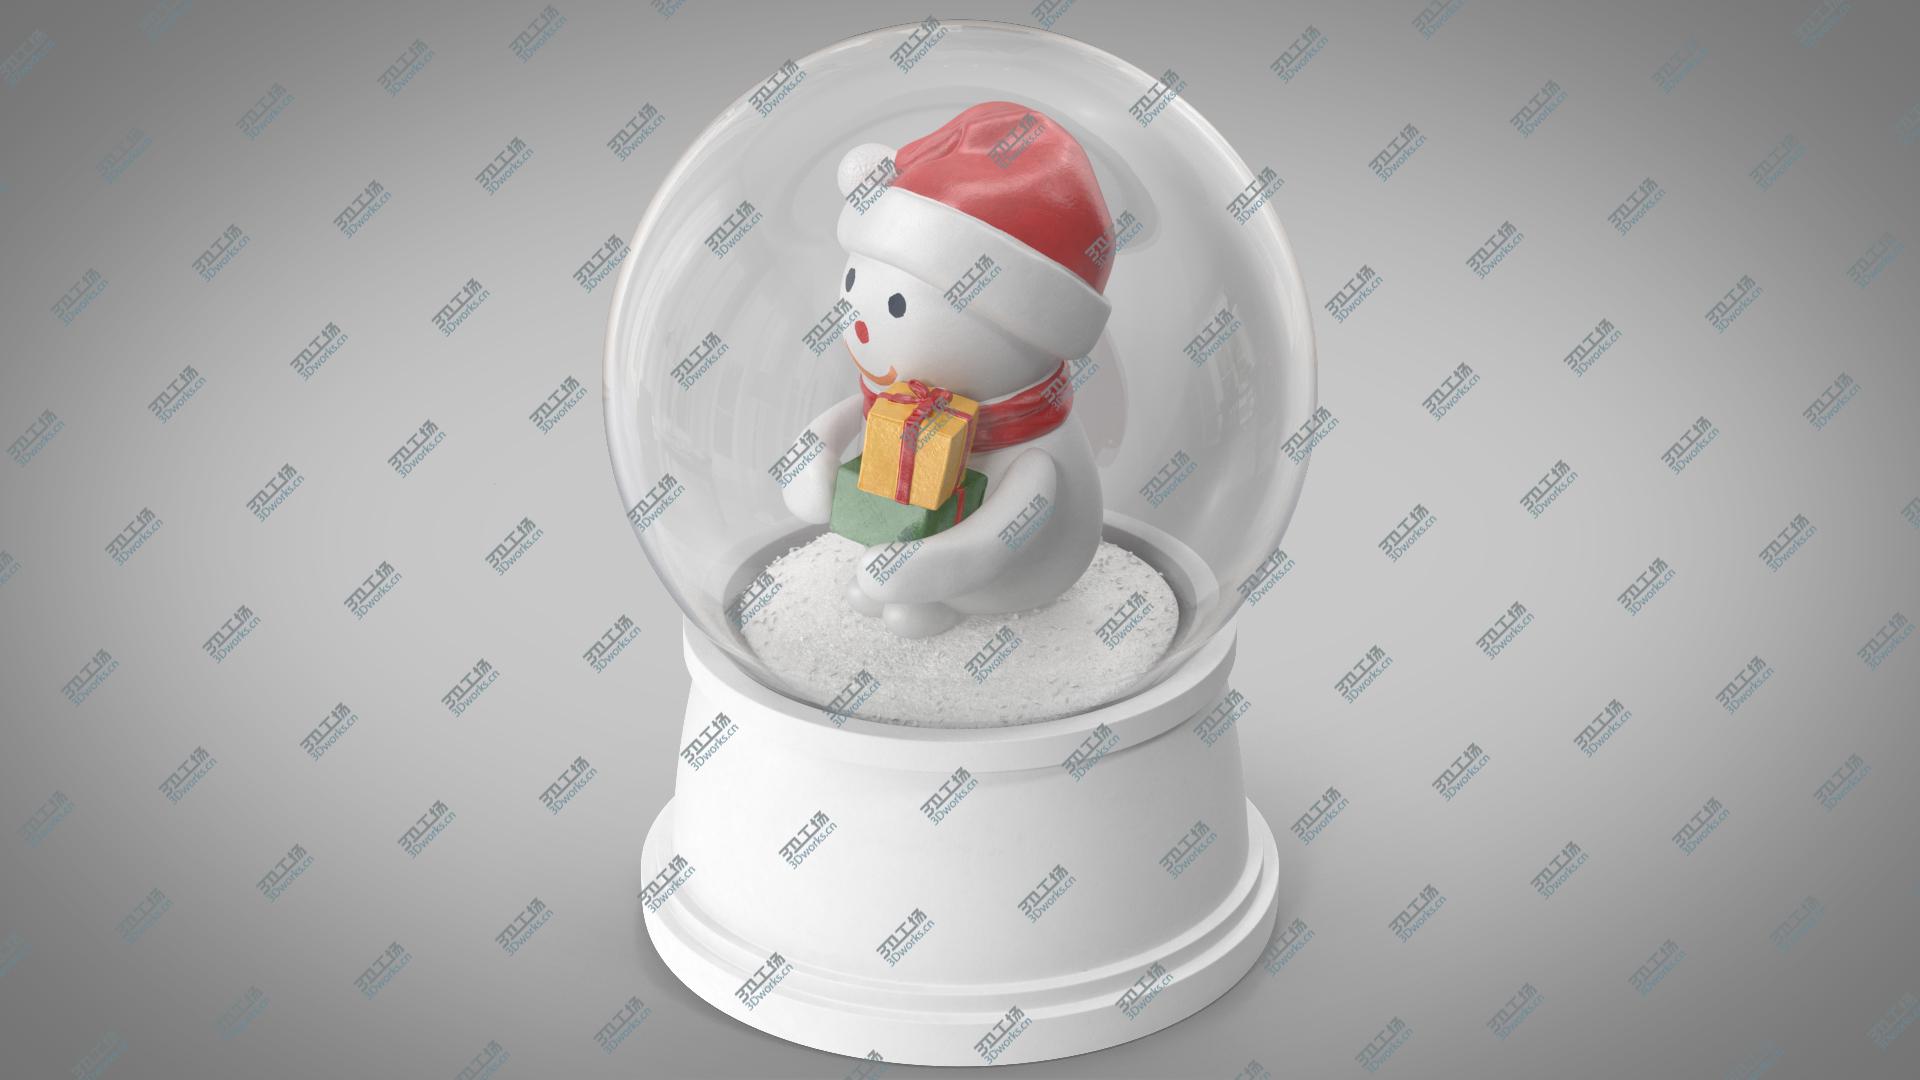 images/goods_img/2021040161/3D Snow Globe with a Snowman 5/3.jpg